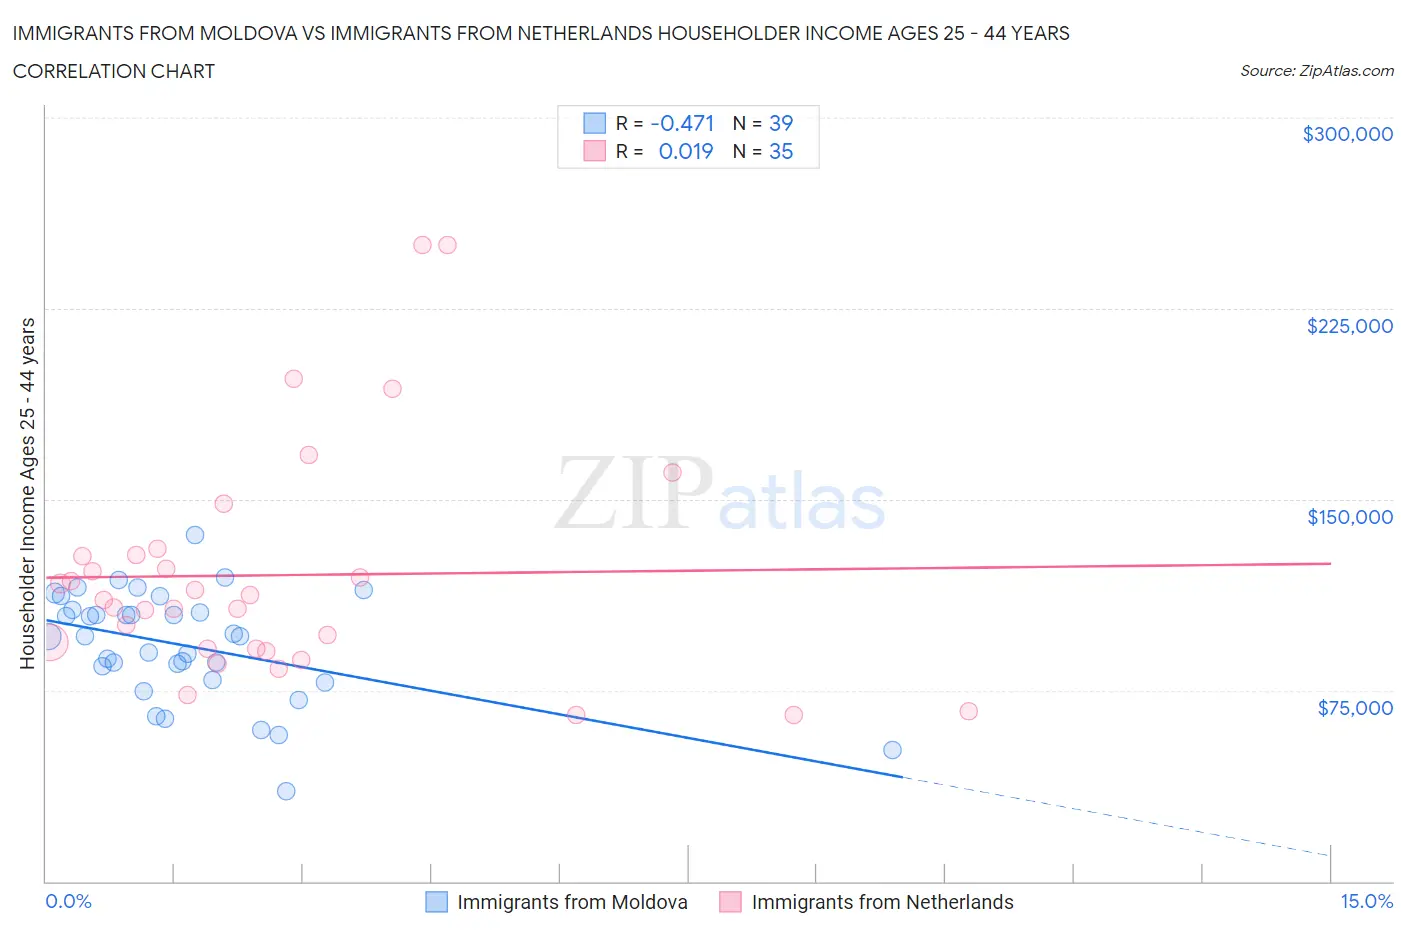 Immigrants from Moldova vs Immigrants from Netherlands Householder Income Ages 25 - 44 years